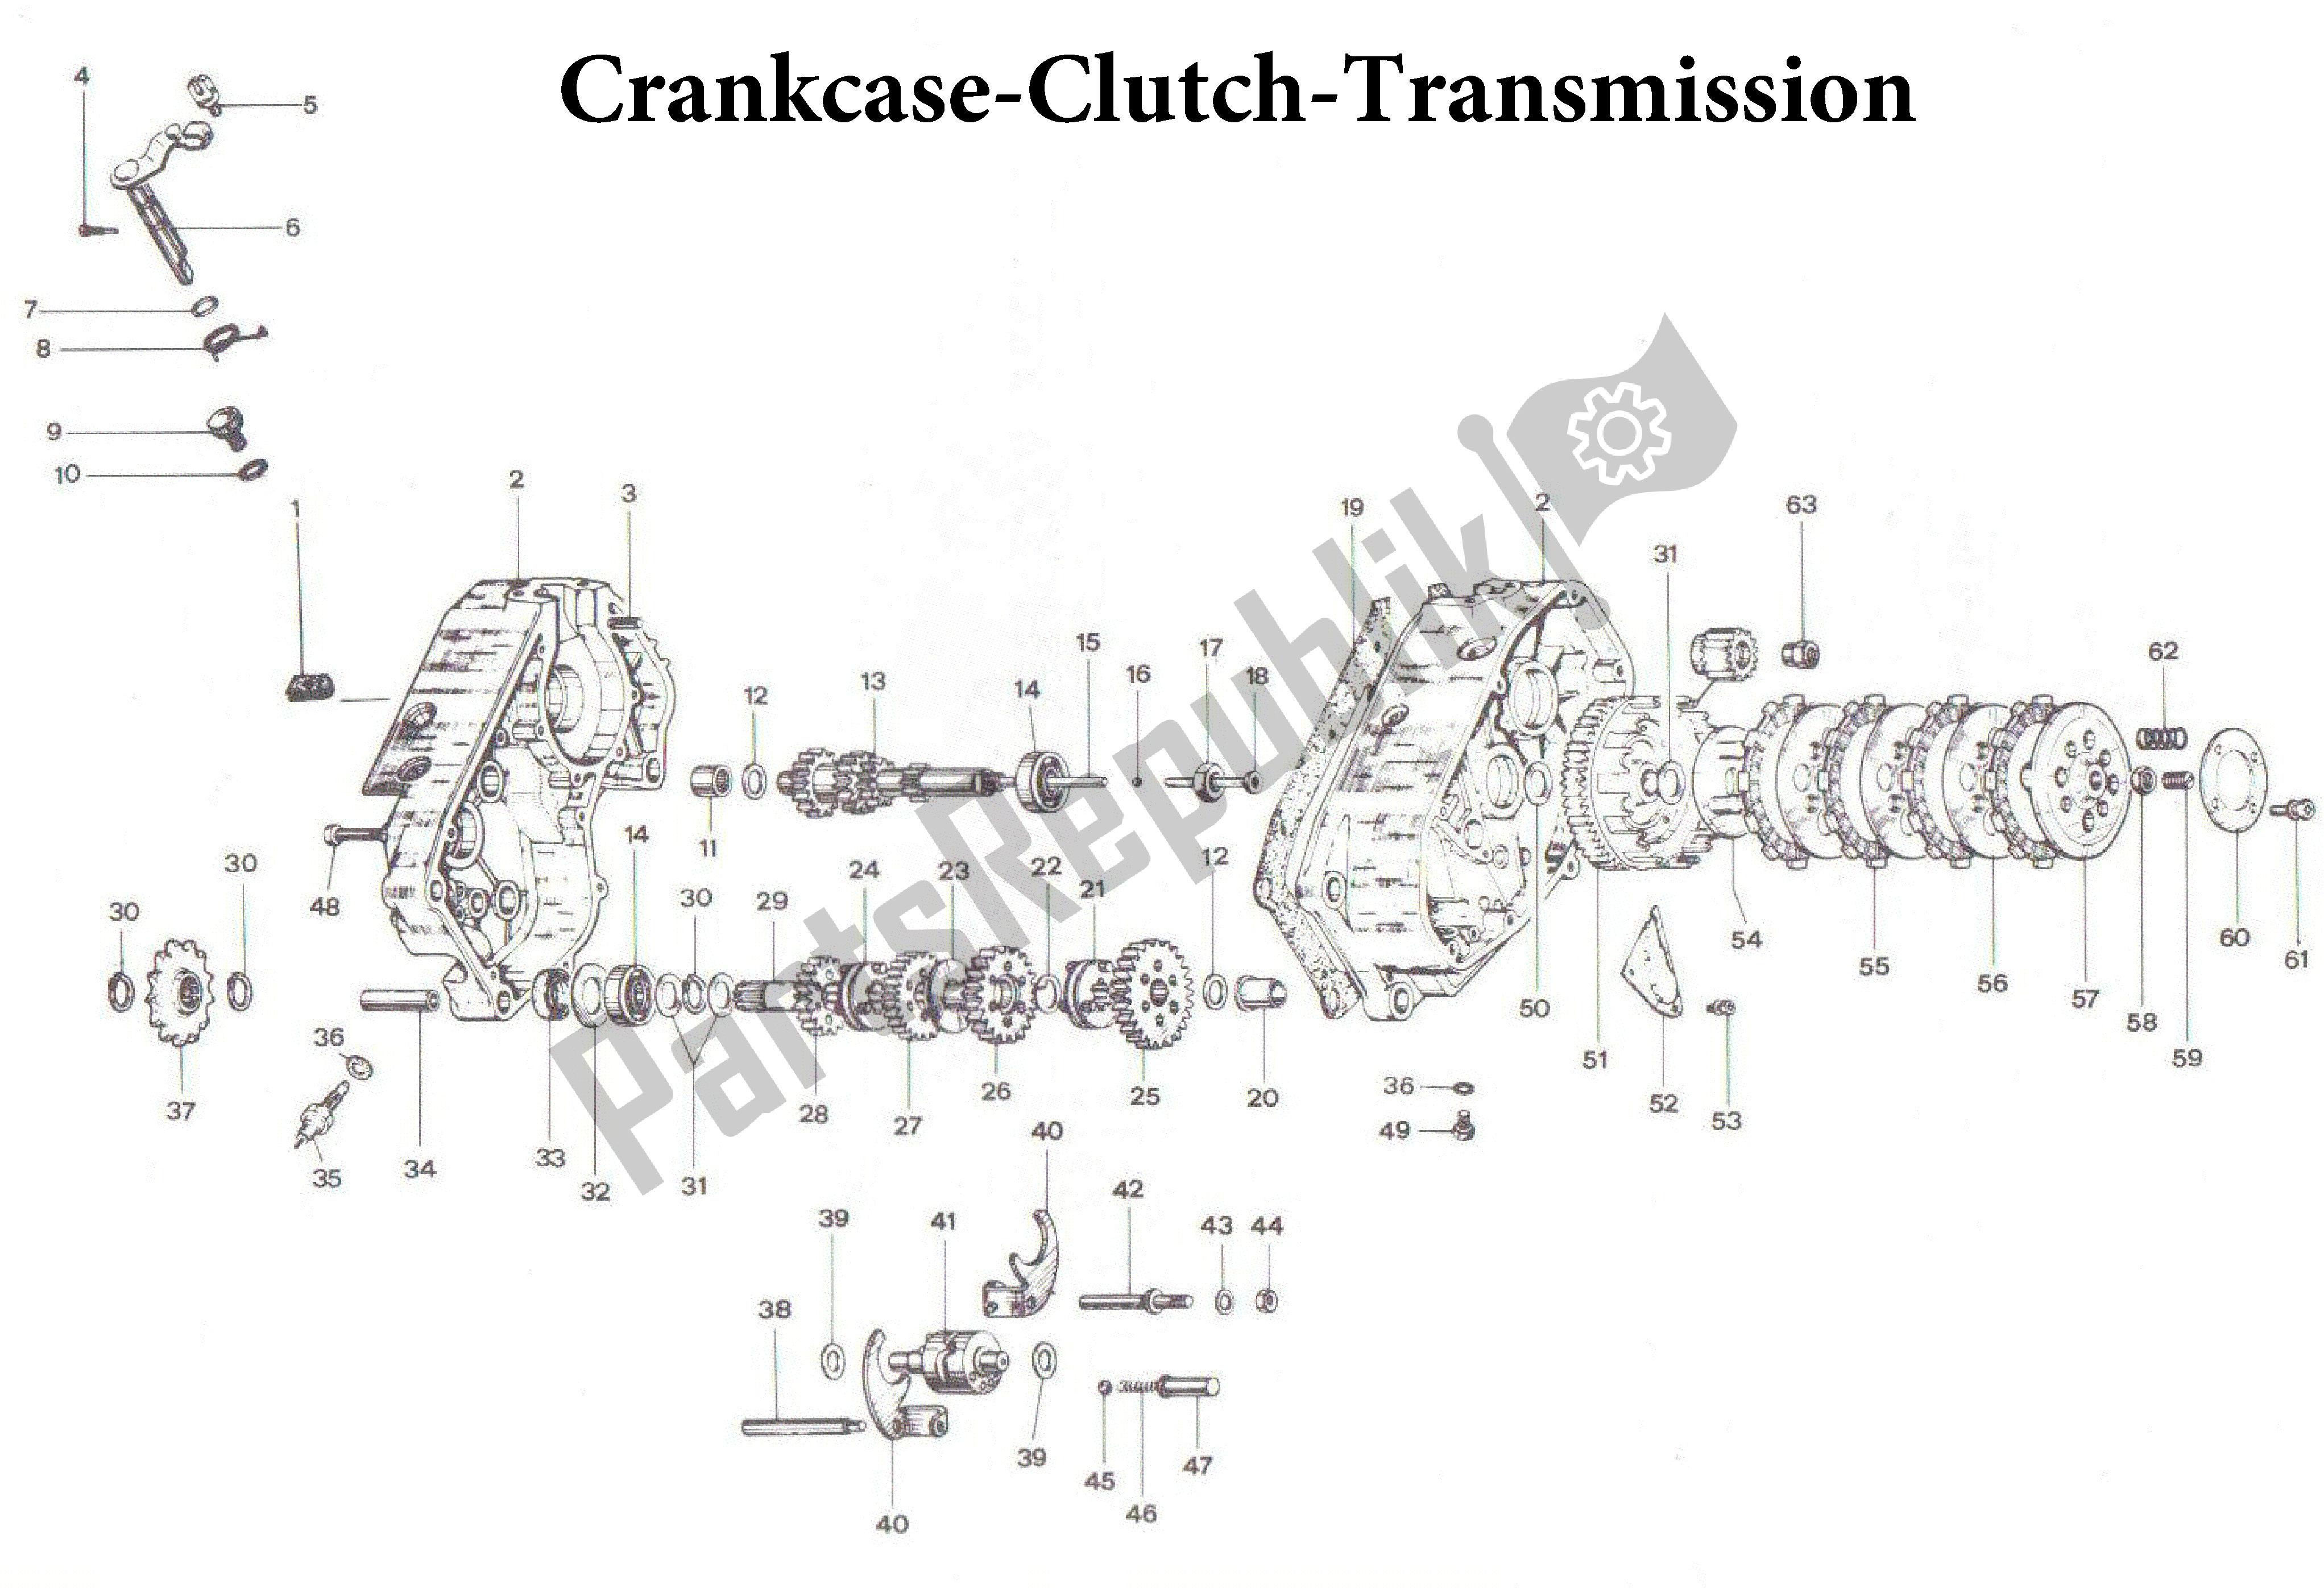 All parts for the Crankcase-clutch-transmission of the Aprilia Rally 50 1995 - 2003